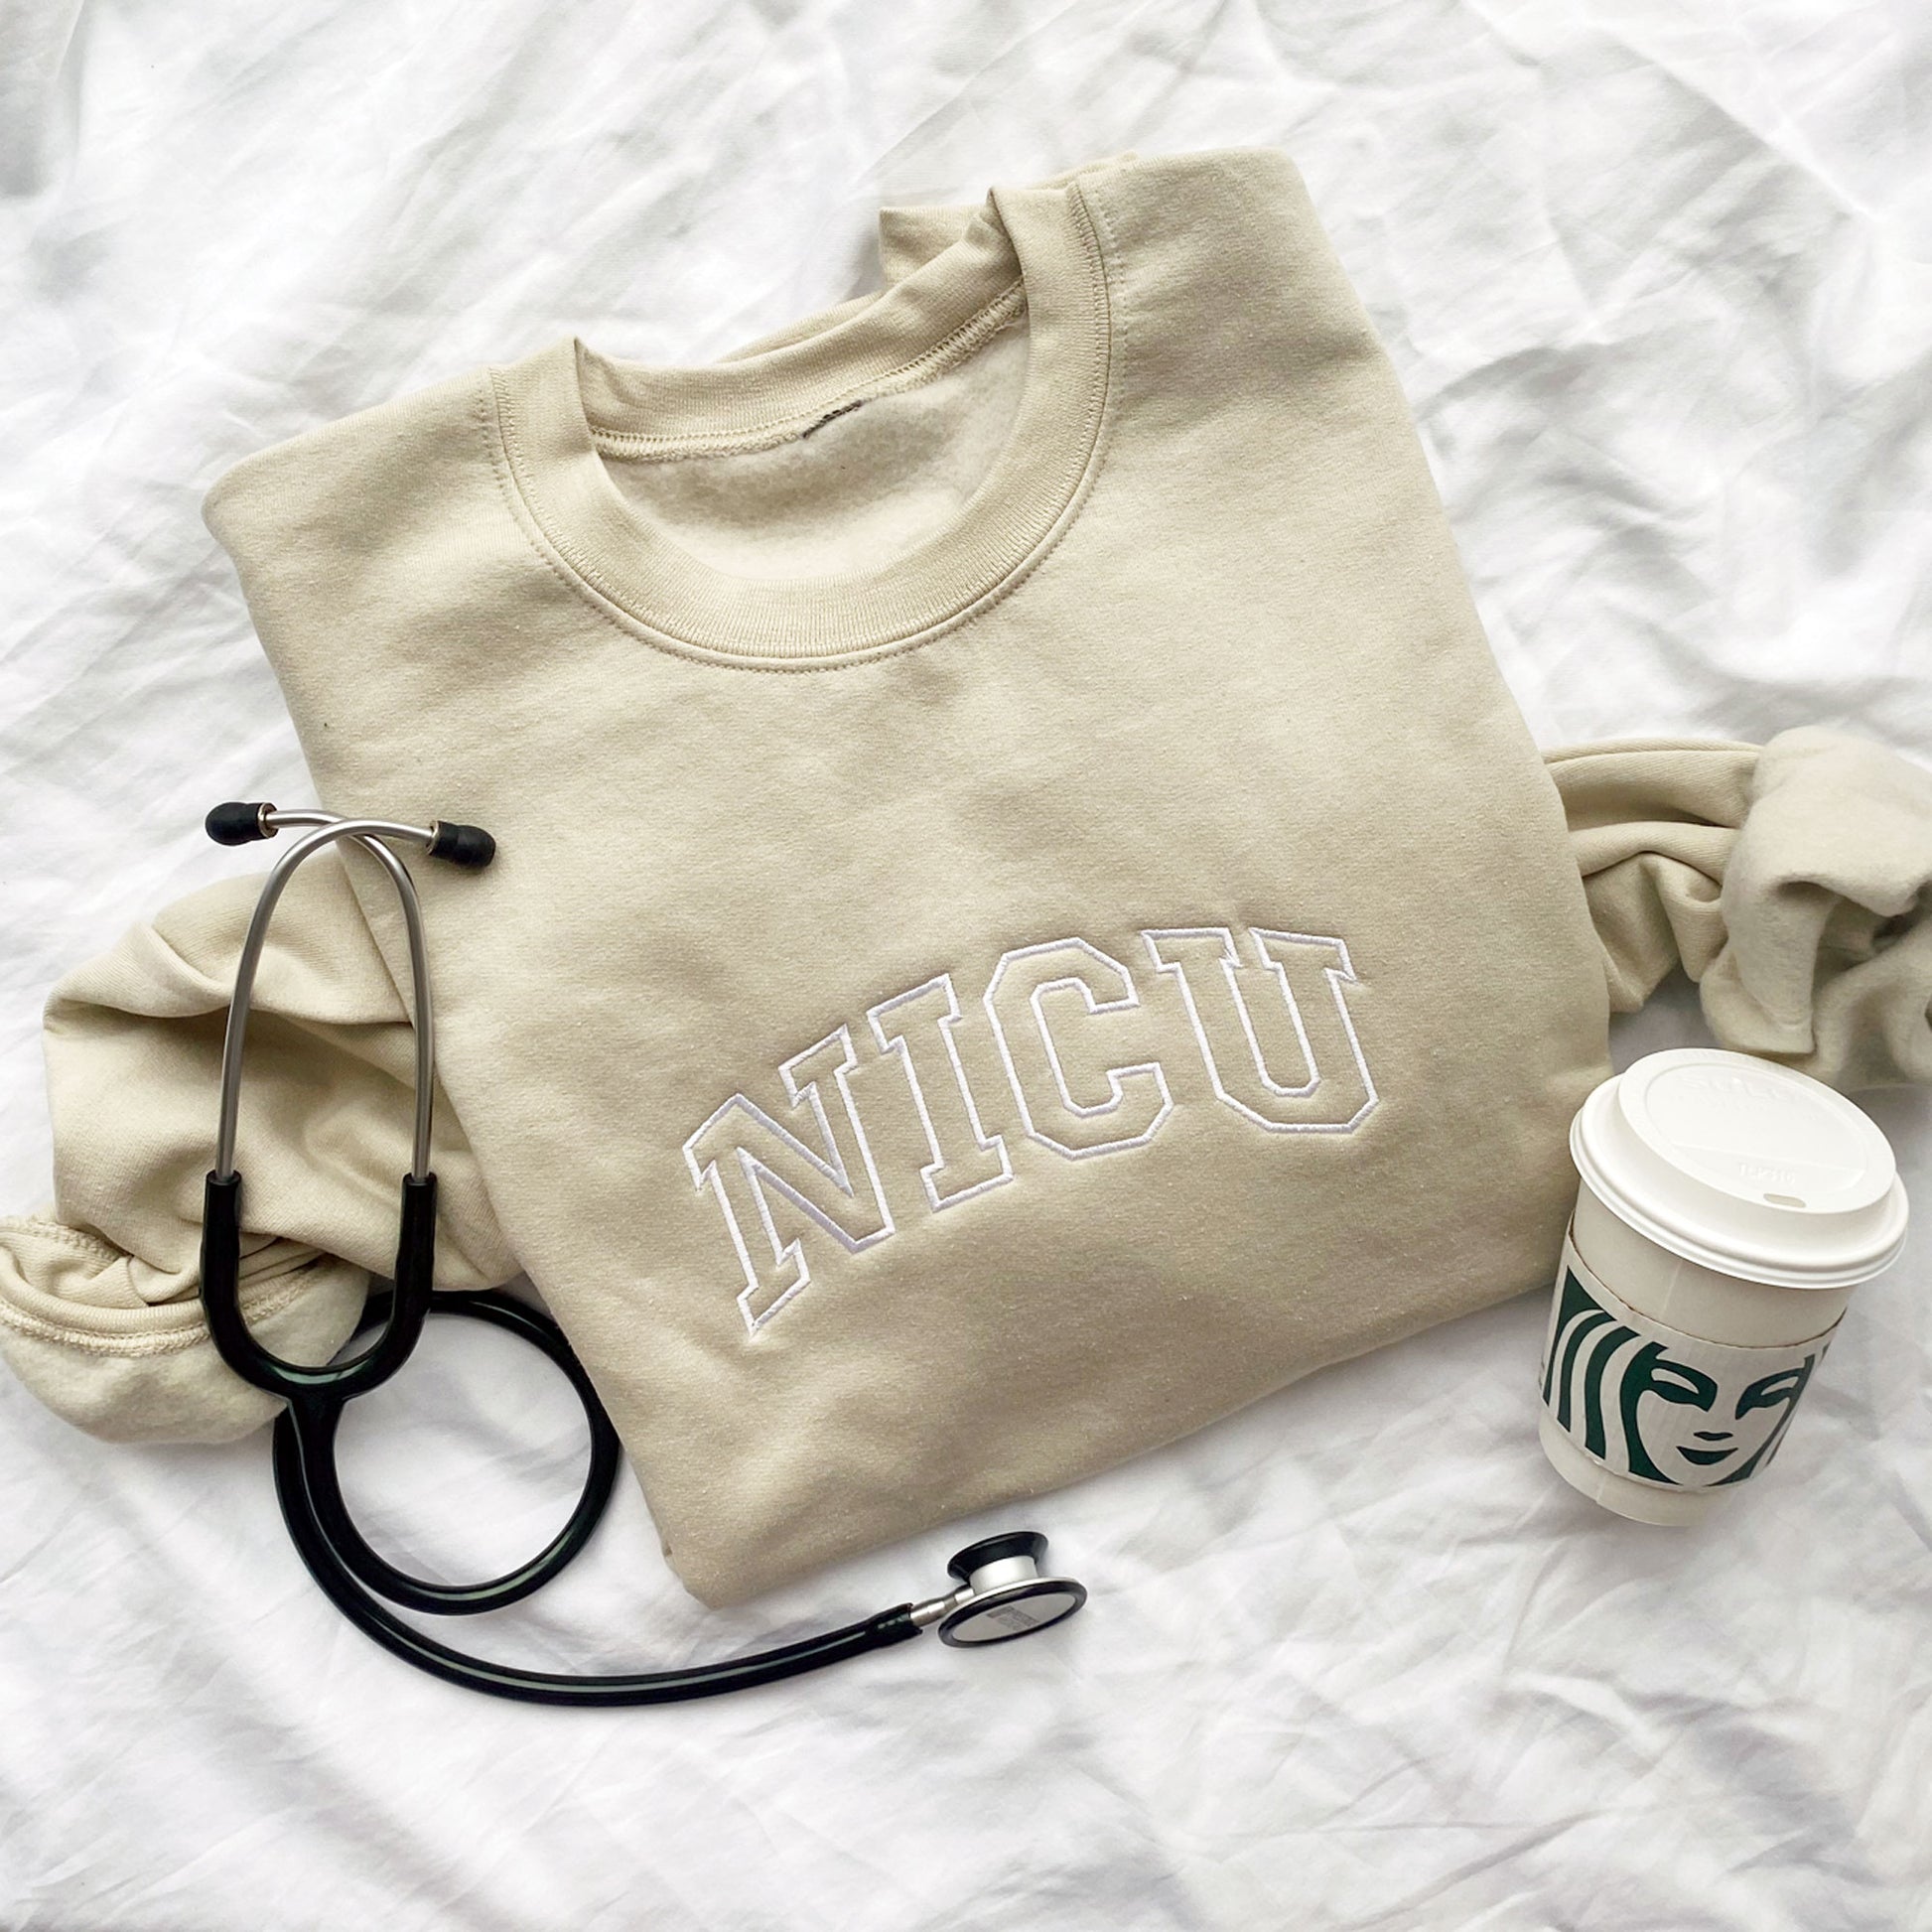 nurse crewneck sweatshirt in sand with nicu embroidered across the chest in an arched athletic block font.